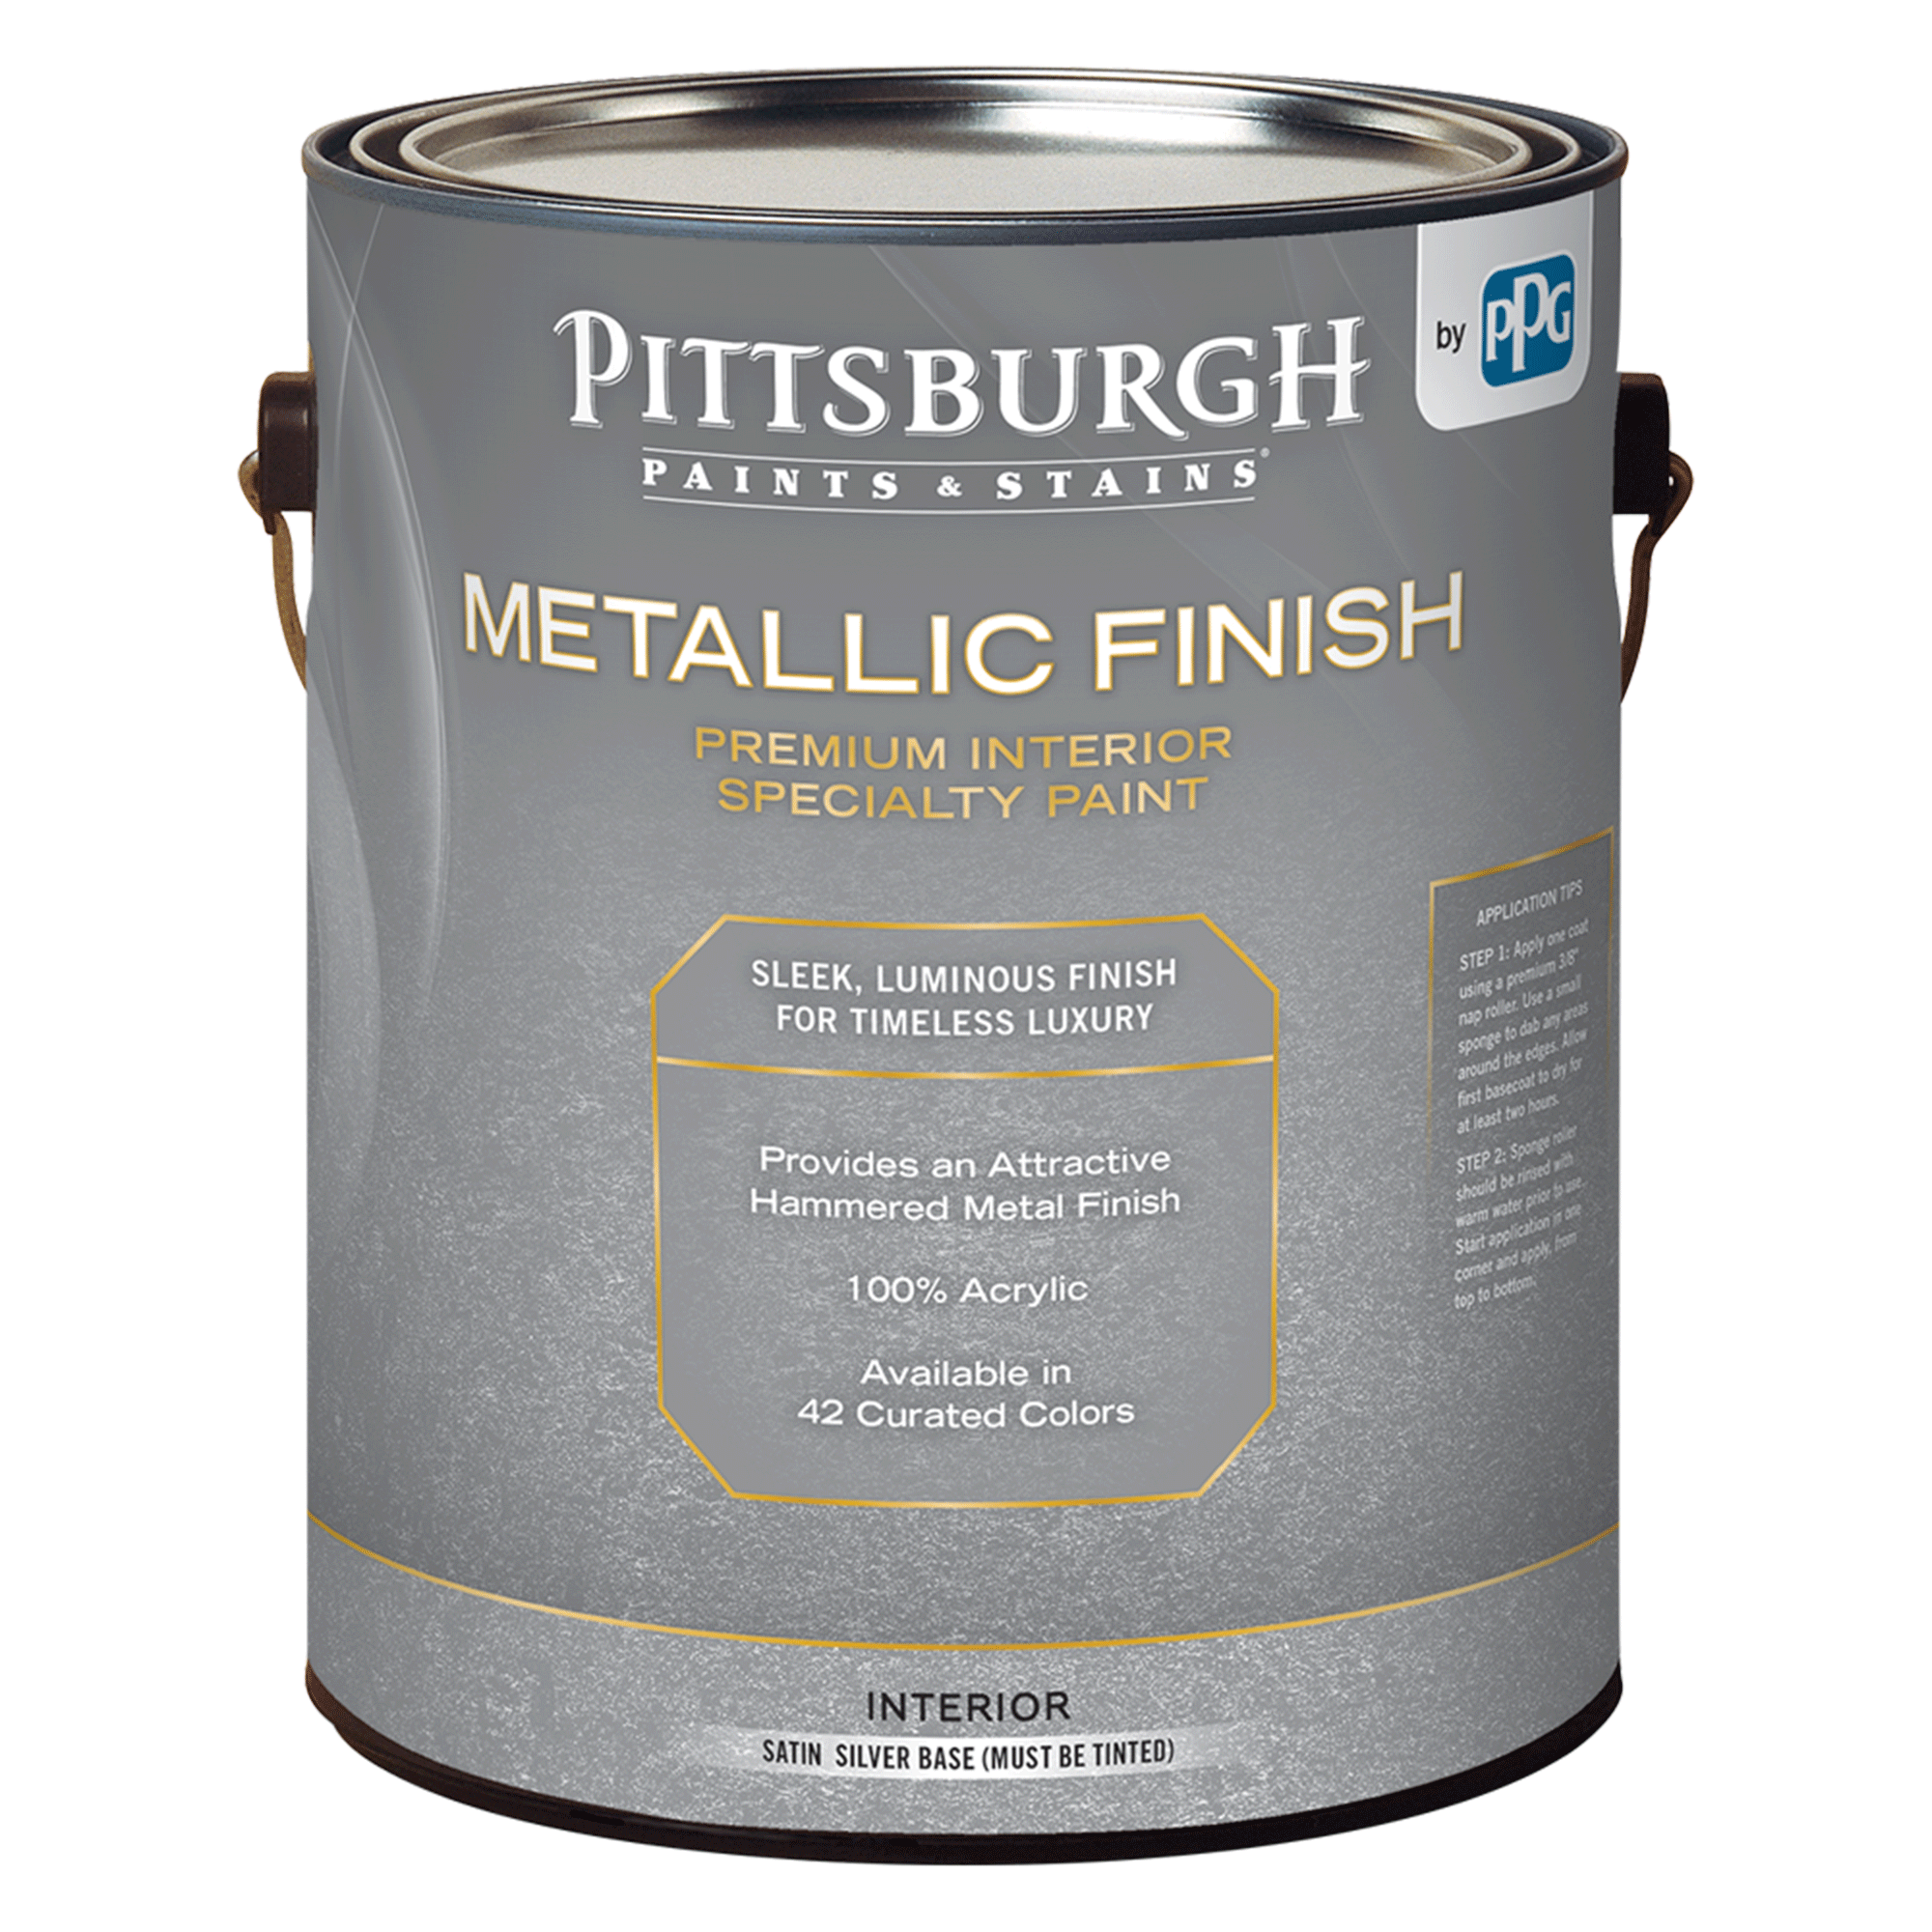 PITTSBURGH PAINTS & STAINS® METALLIC FINISH